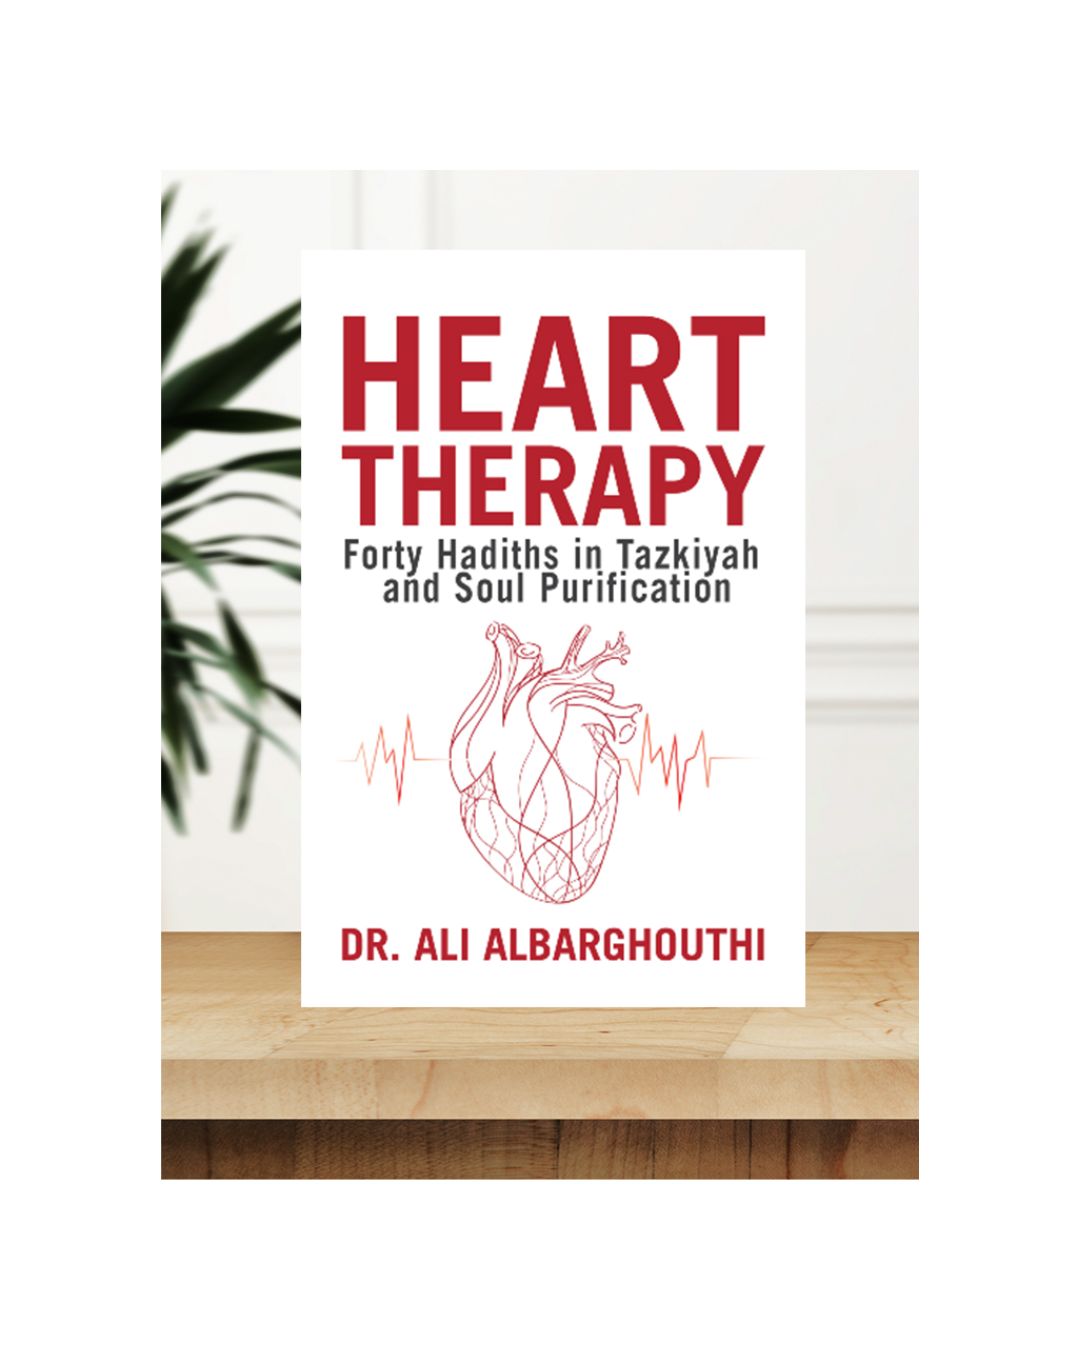 Heart Therapy: Forty Hadiths in Tazkiyah and Soul Purification by Ali Albarghouthi